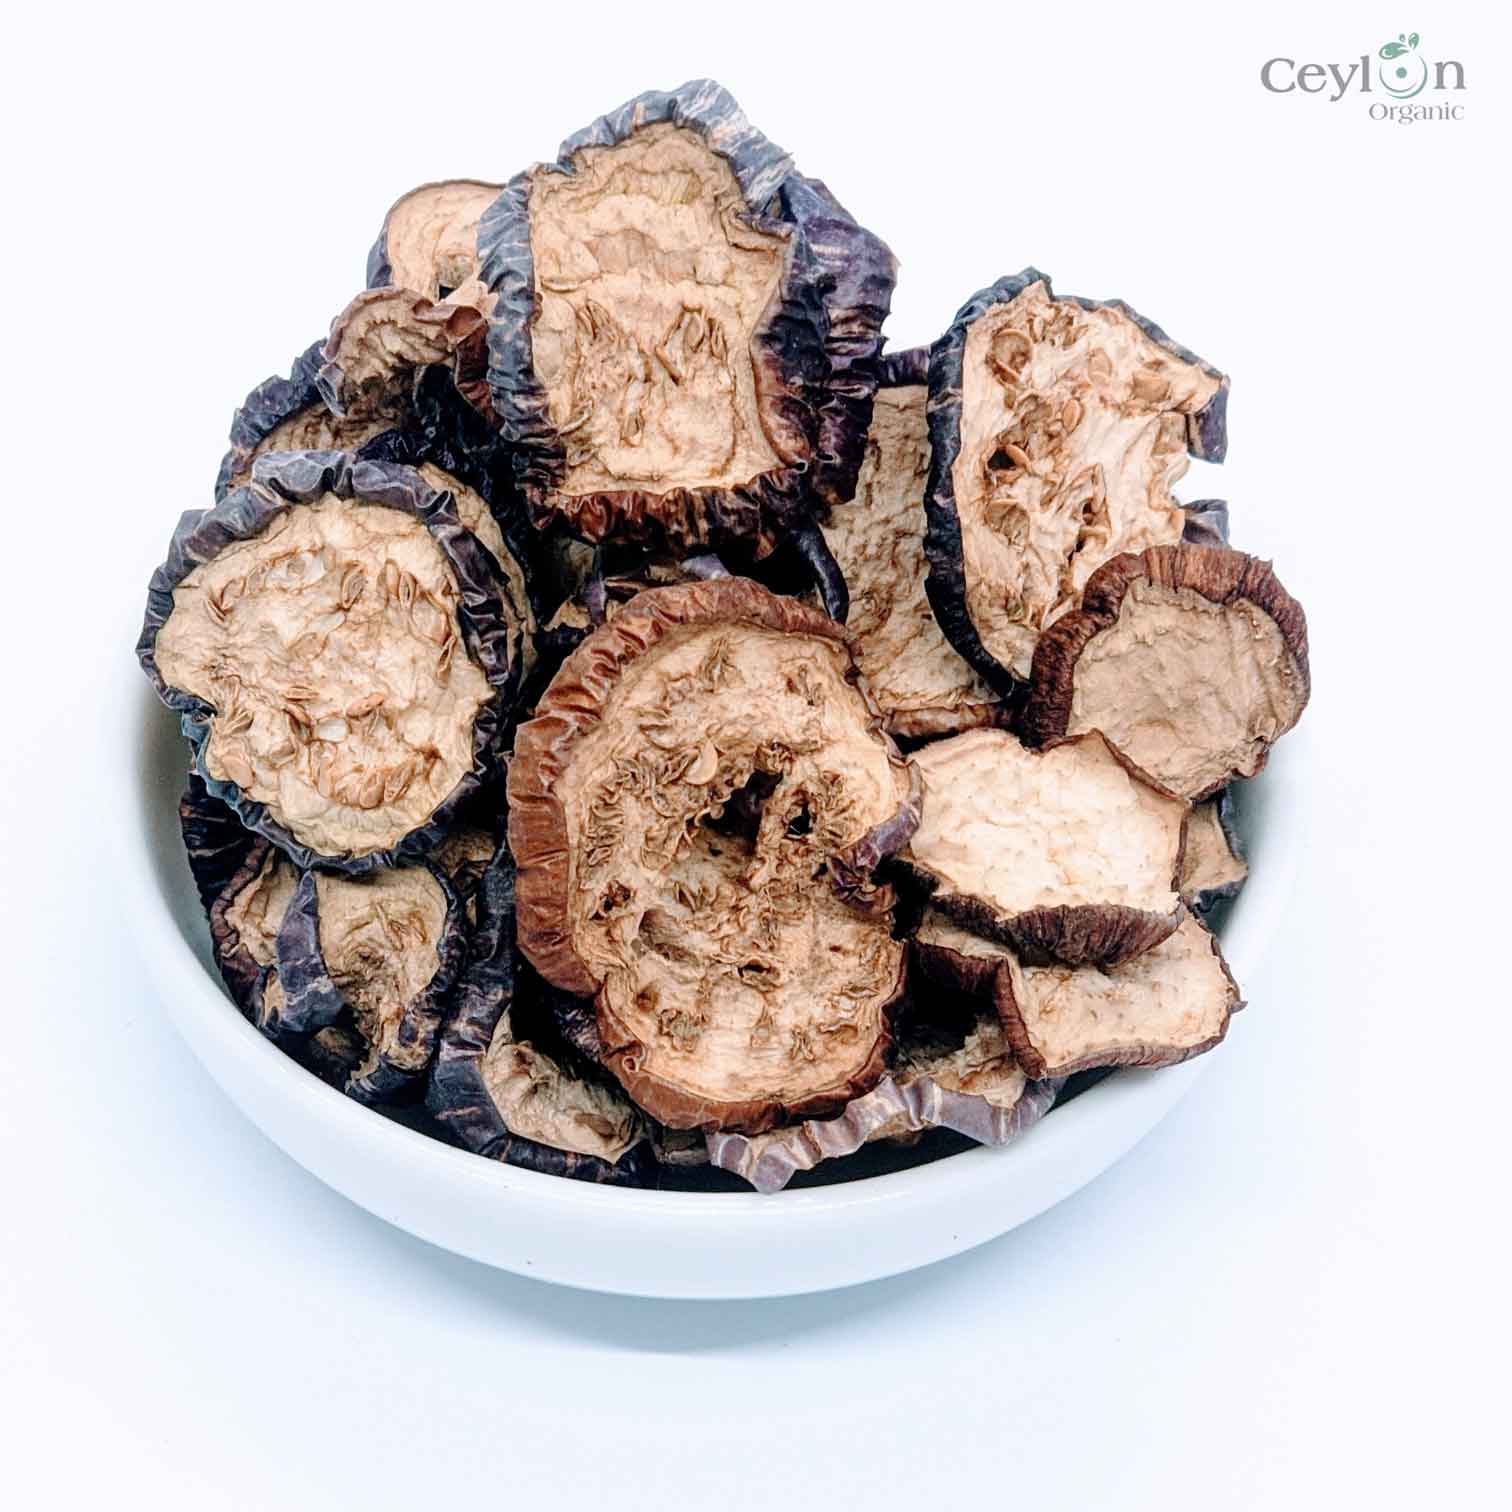 3kg+ Dehydrated organic Brinjal Slices pure natural homemade best | Ceylon organic-5